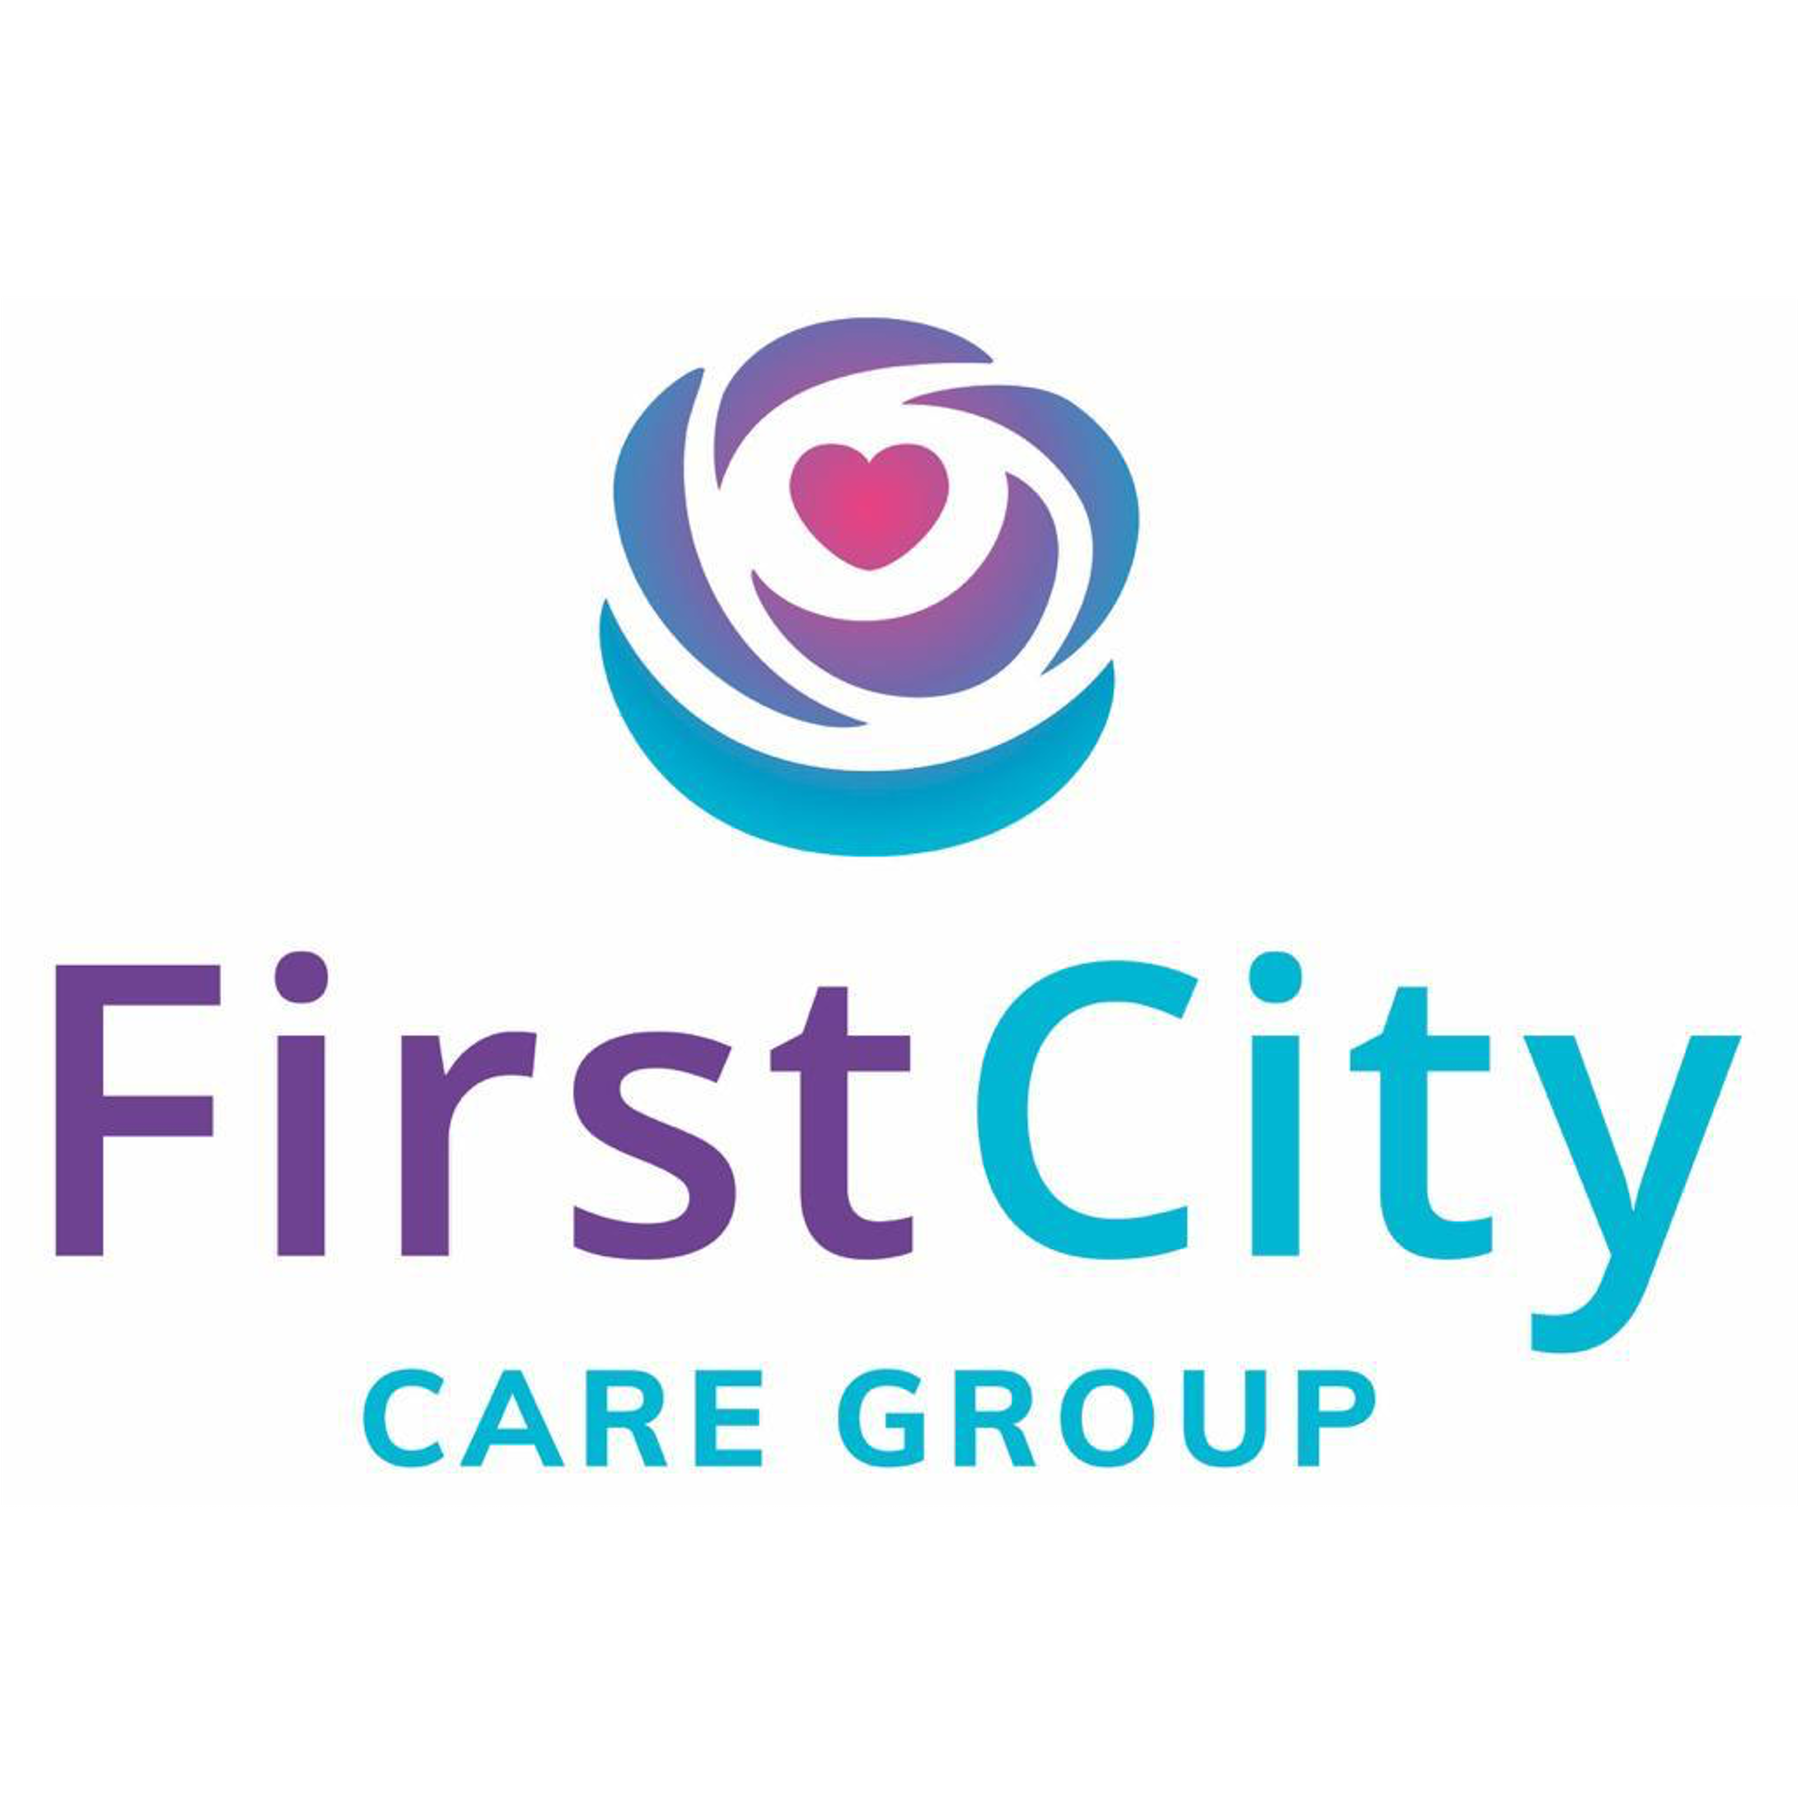 First City Care Group Logo